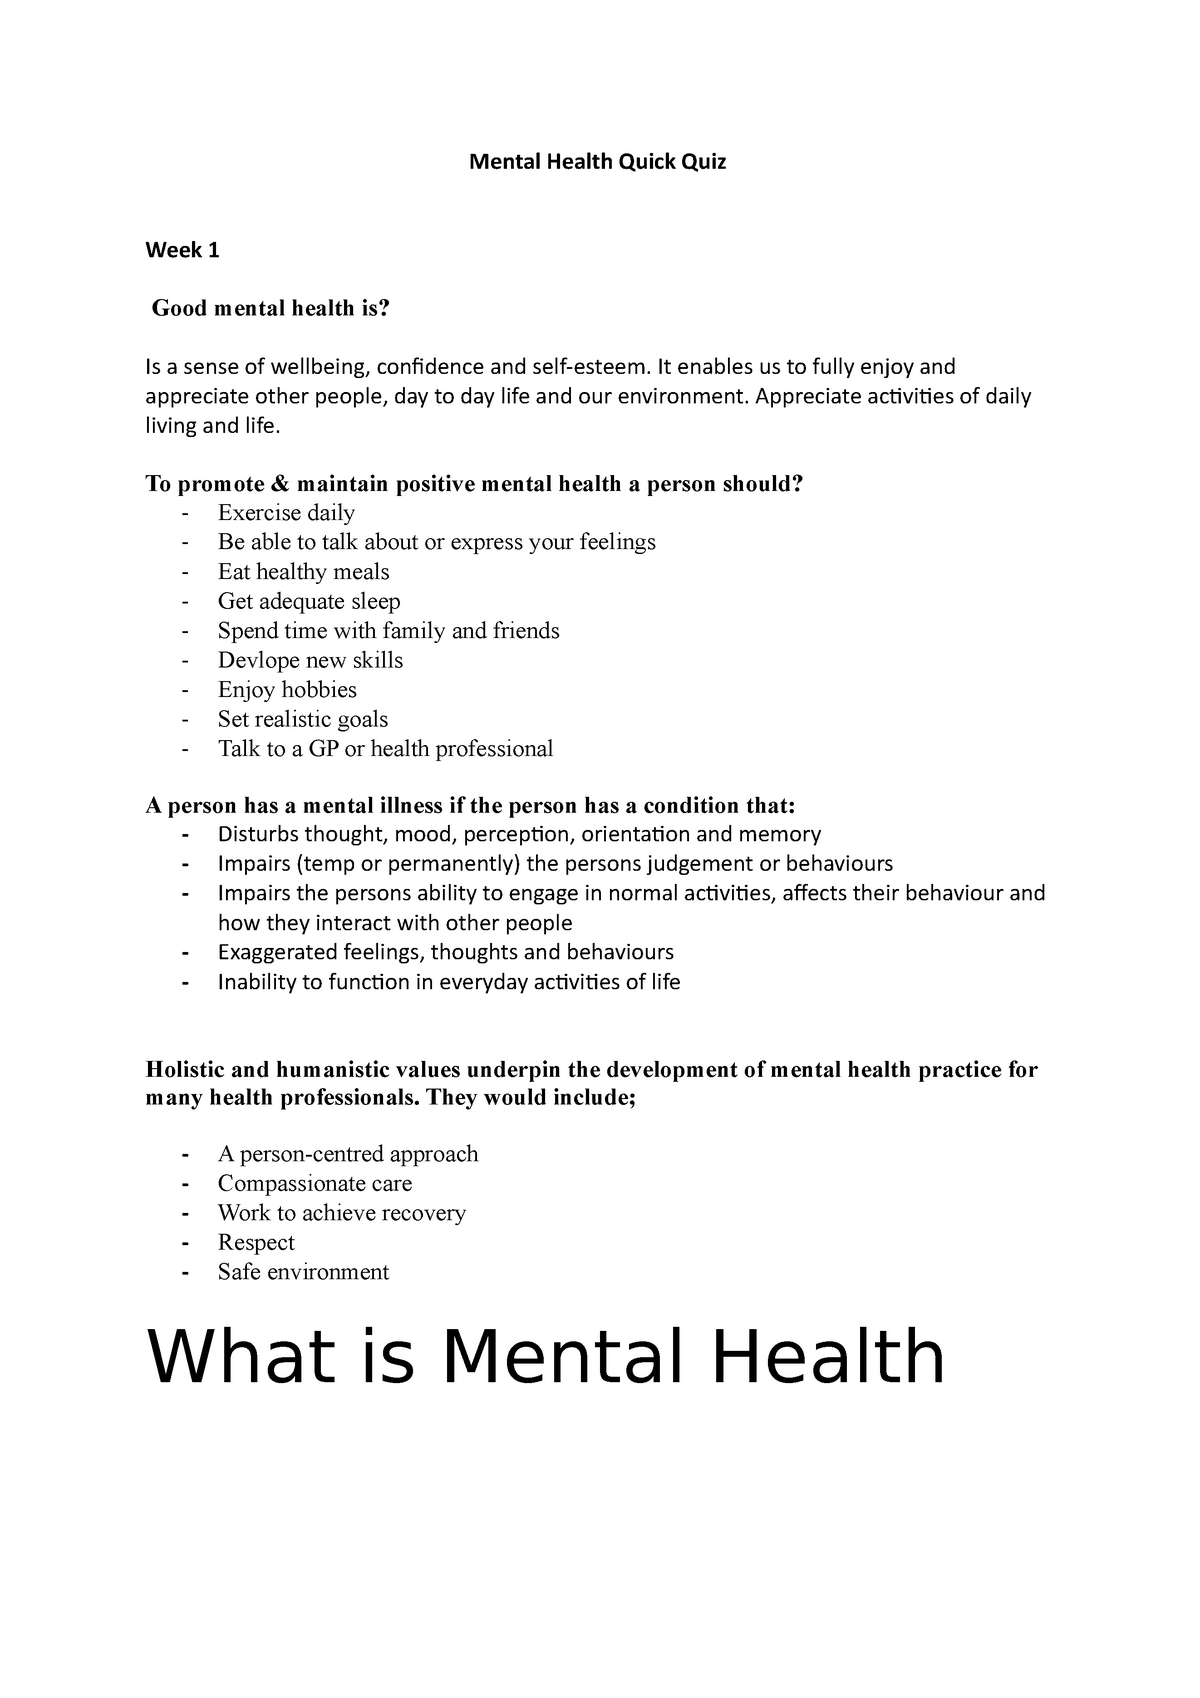 Mental Health and Wellbeing Quiz 